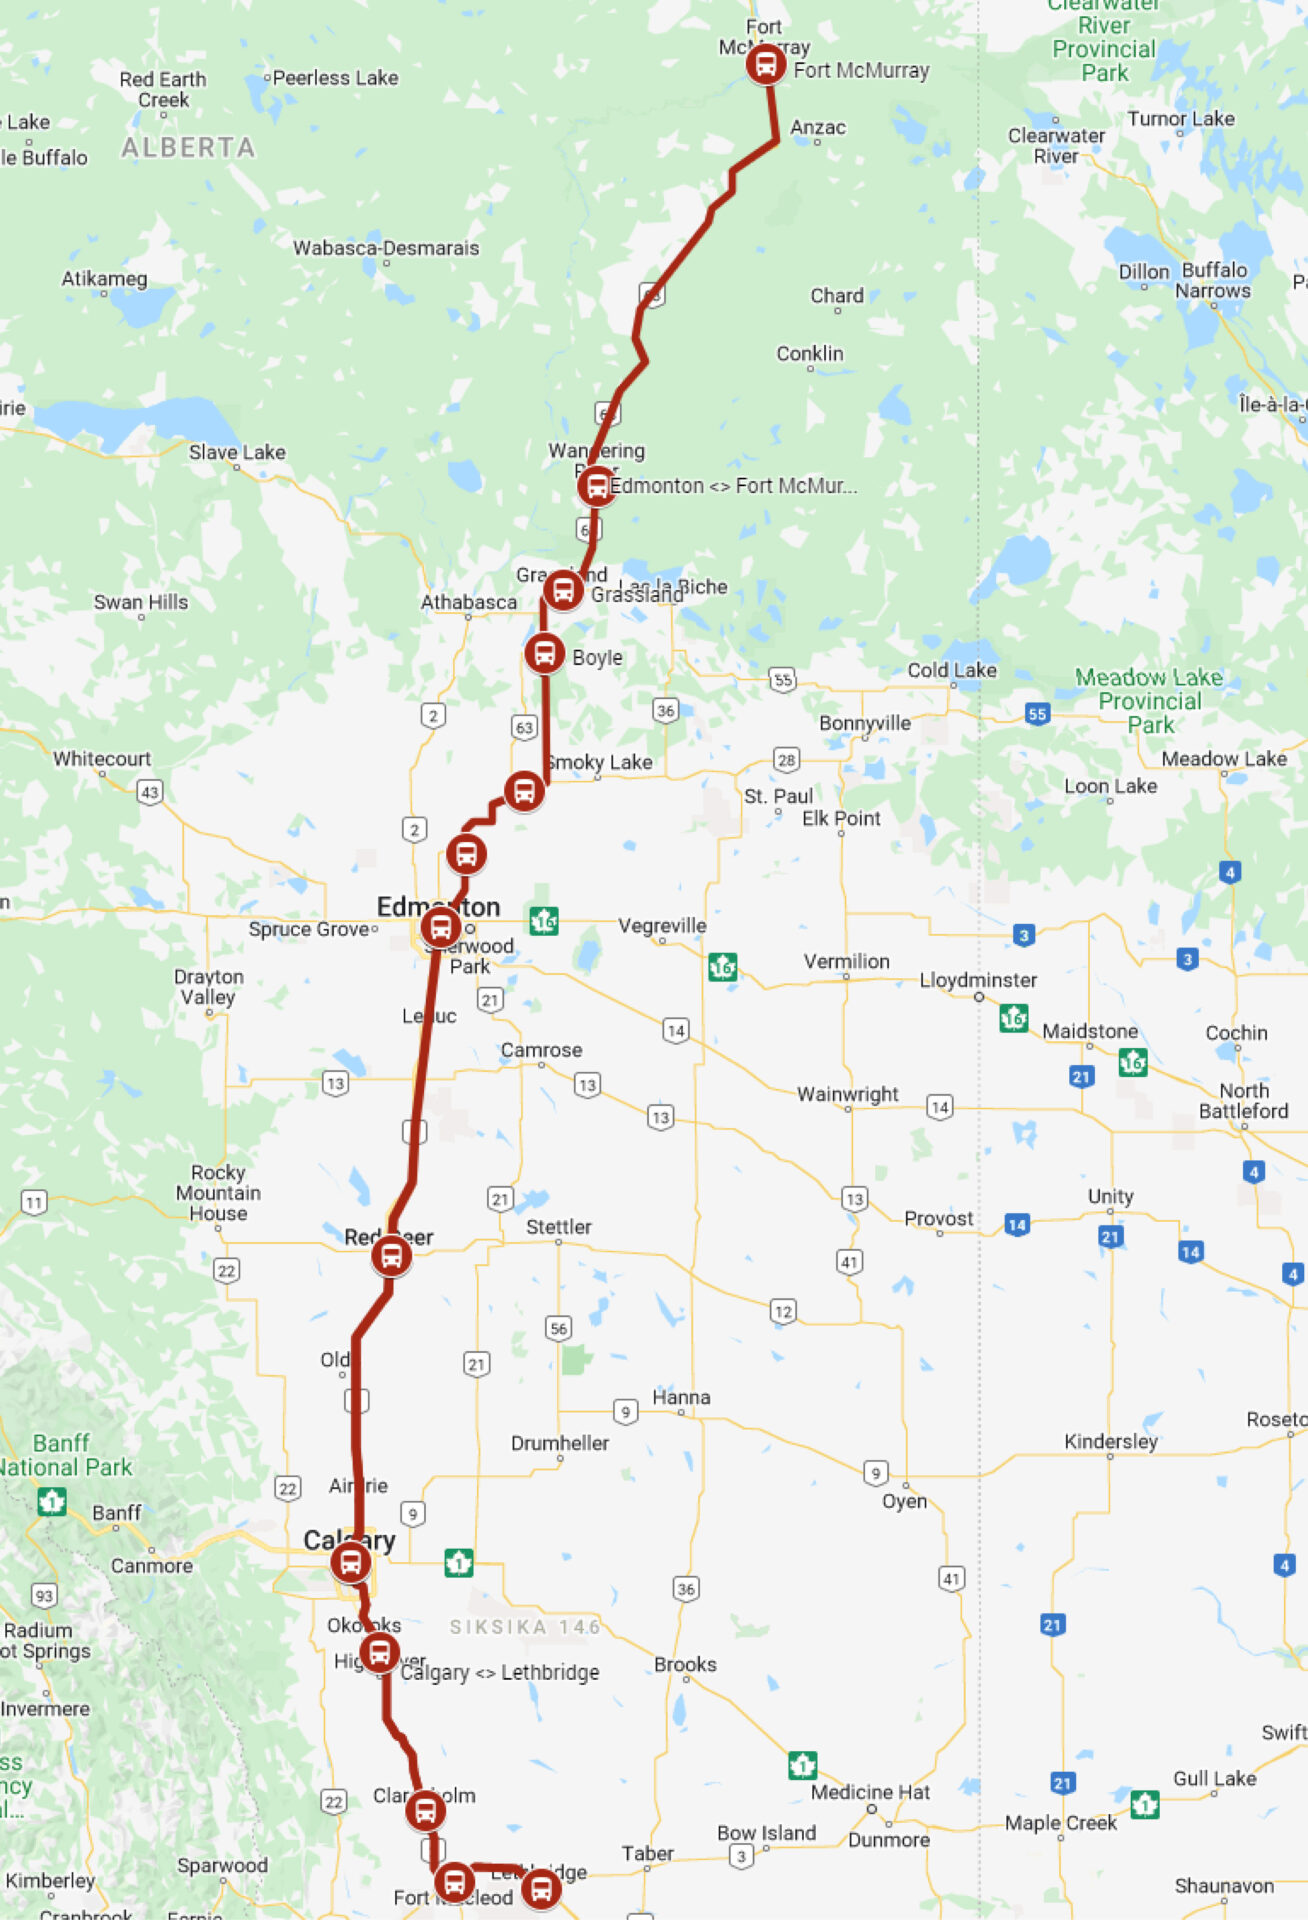 Fort McMurray to Lethbridge - Red Arrow